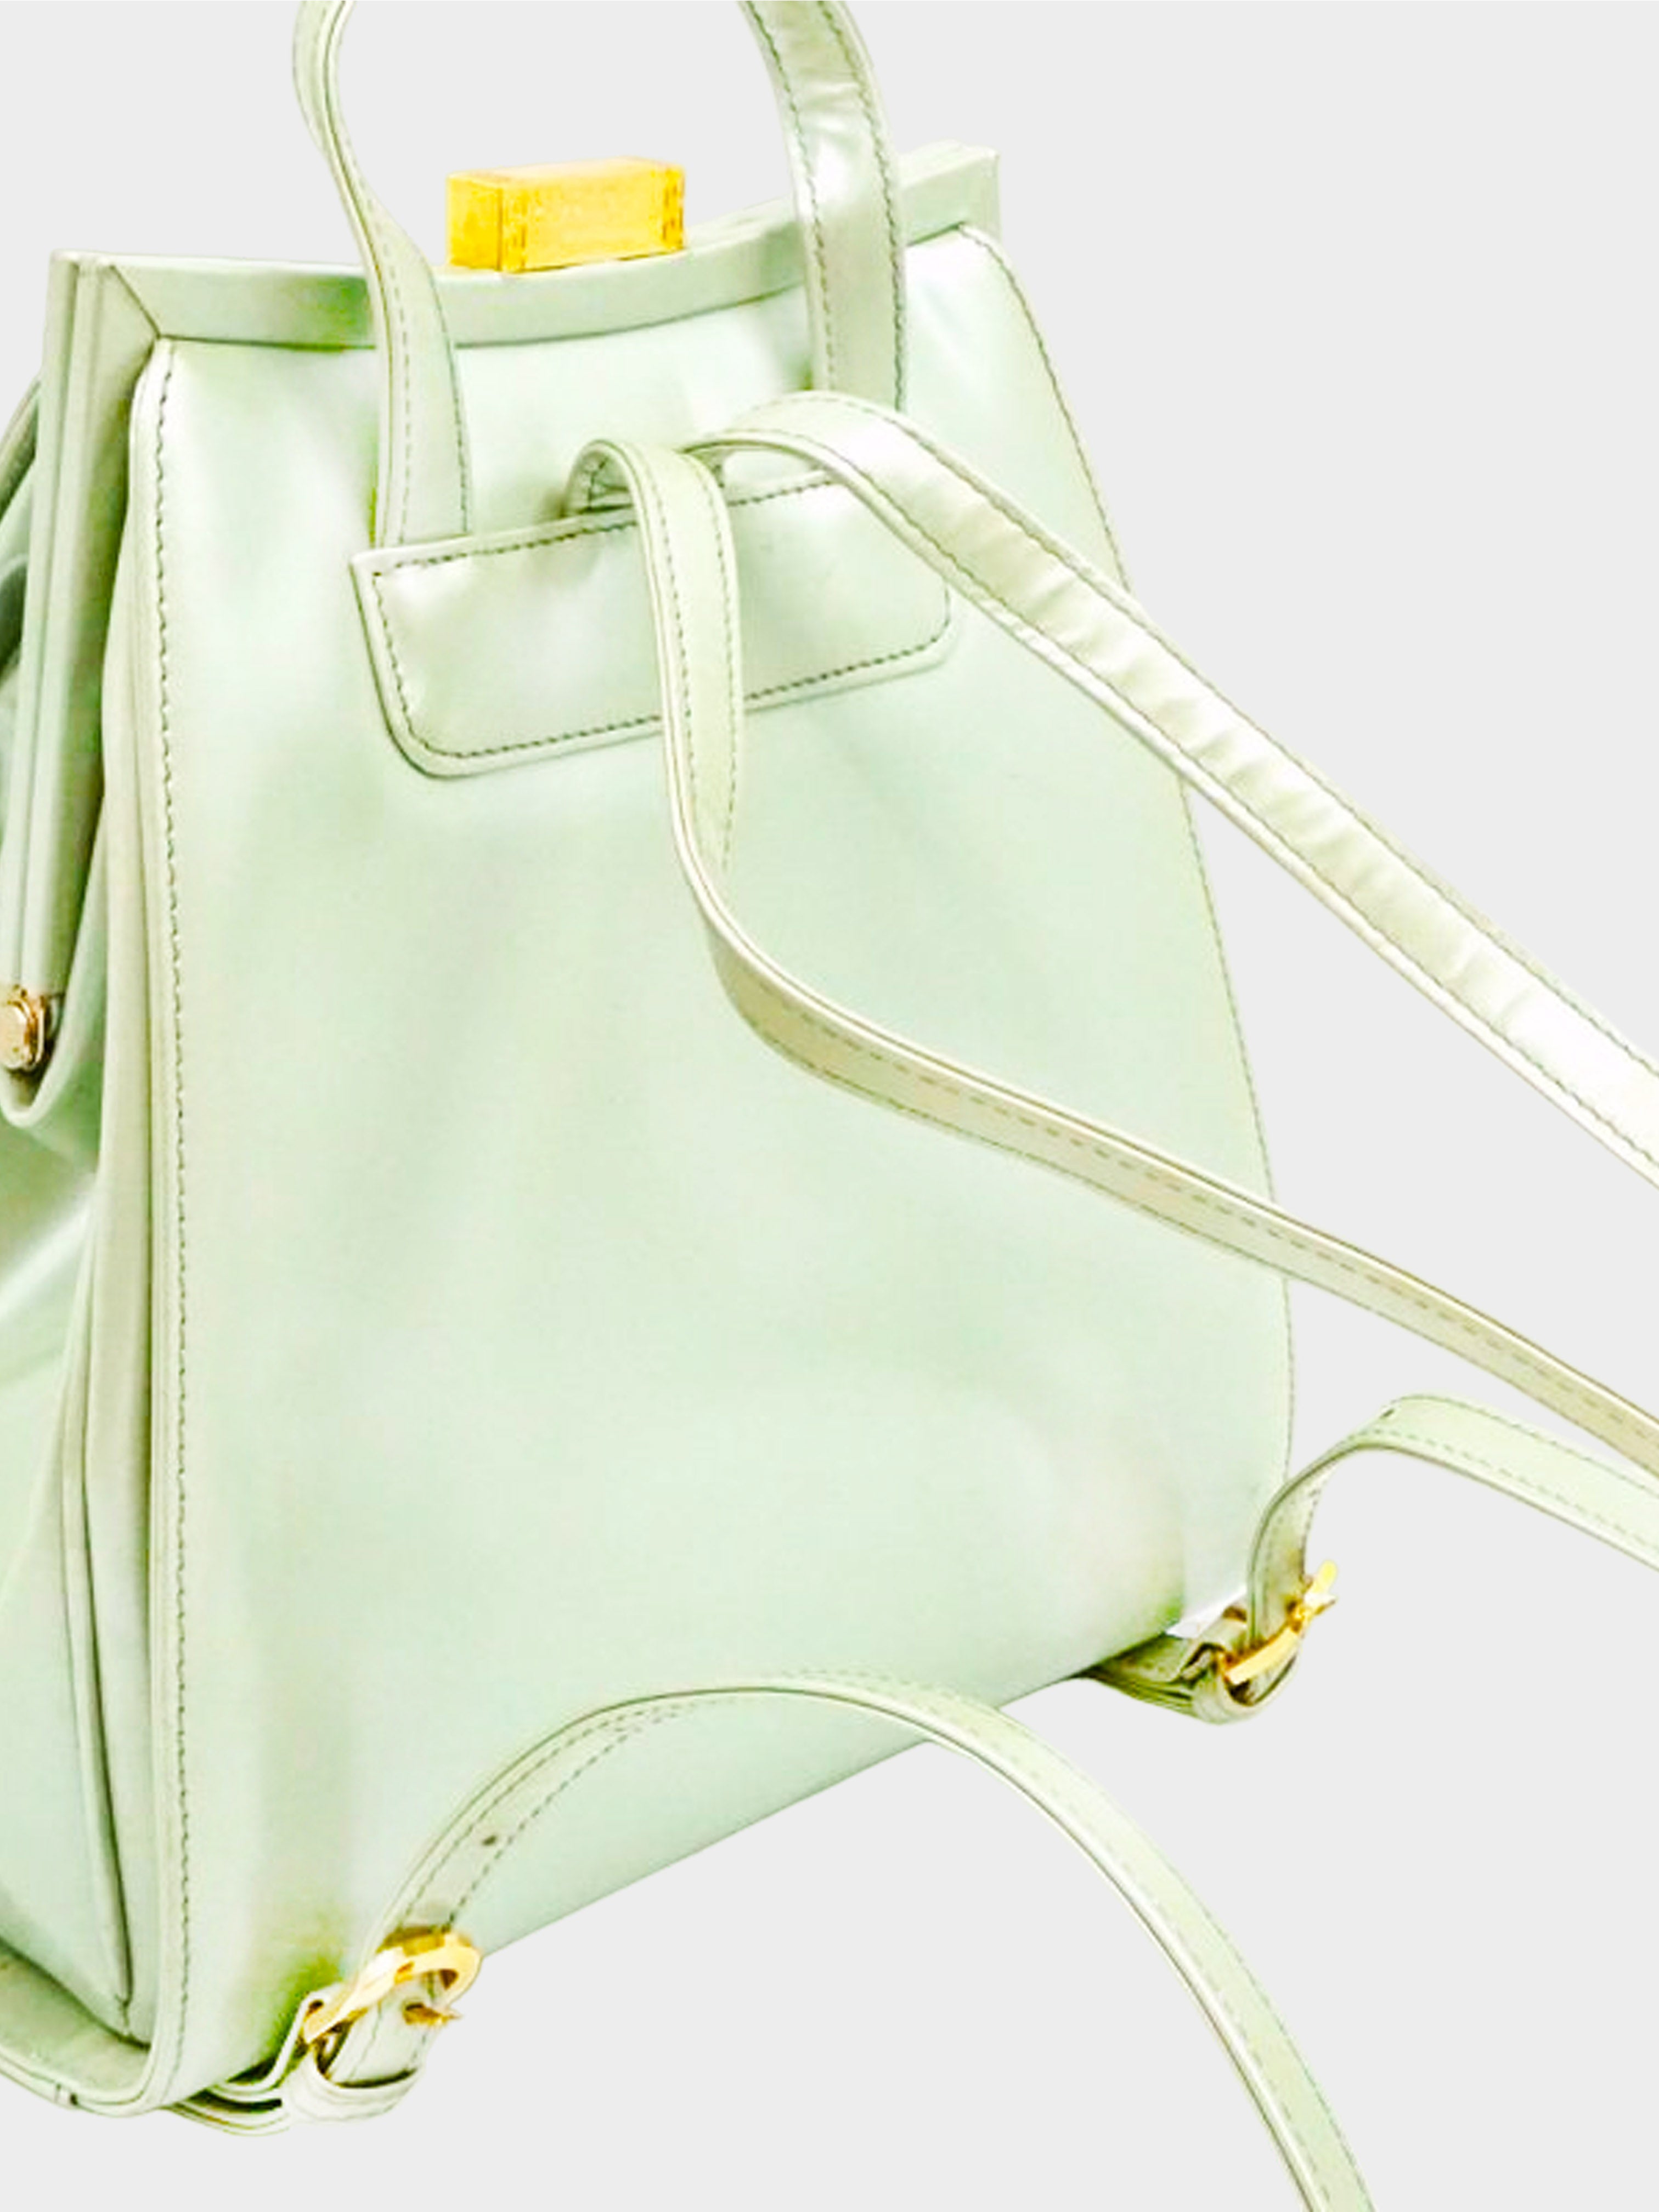 Gianni Versace 2000s Pastel Green Sunburst Patent Leather Backpack